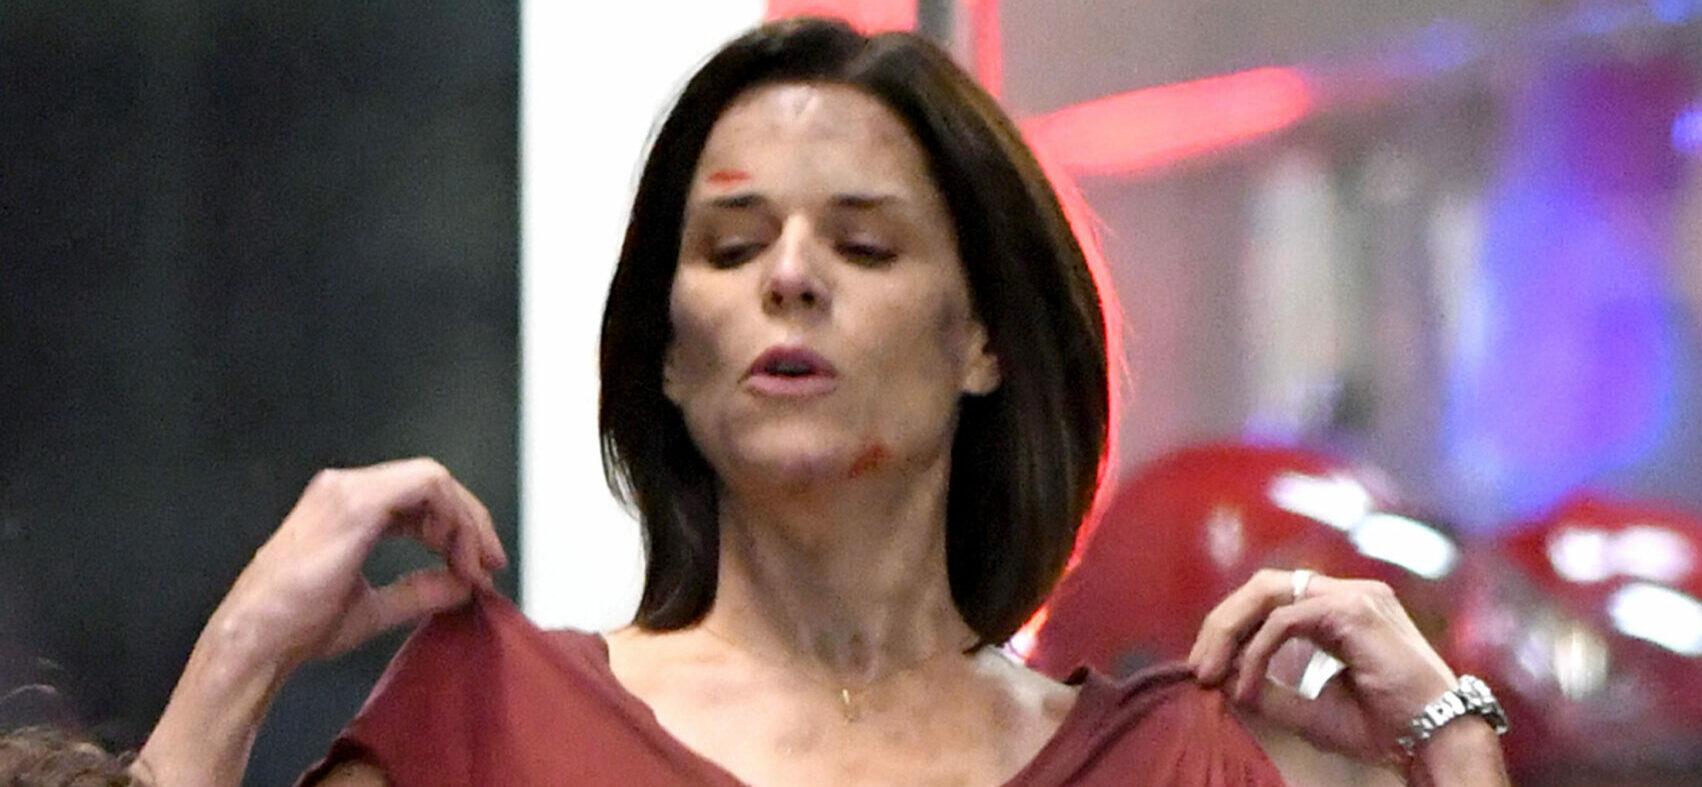 Neve Campbell appears bruised and battered on set of Skyscraper filming in Vancouver, Canada